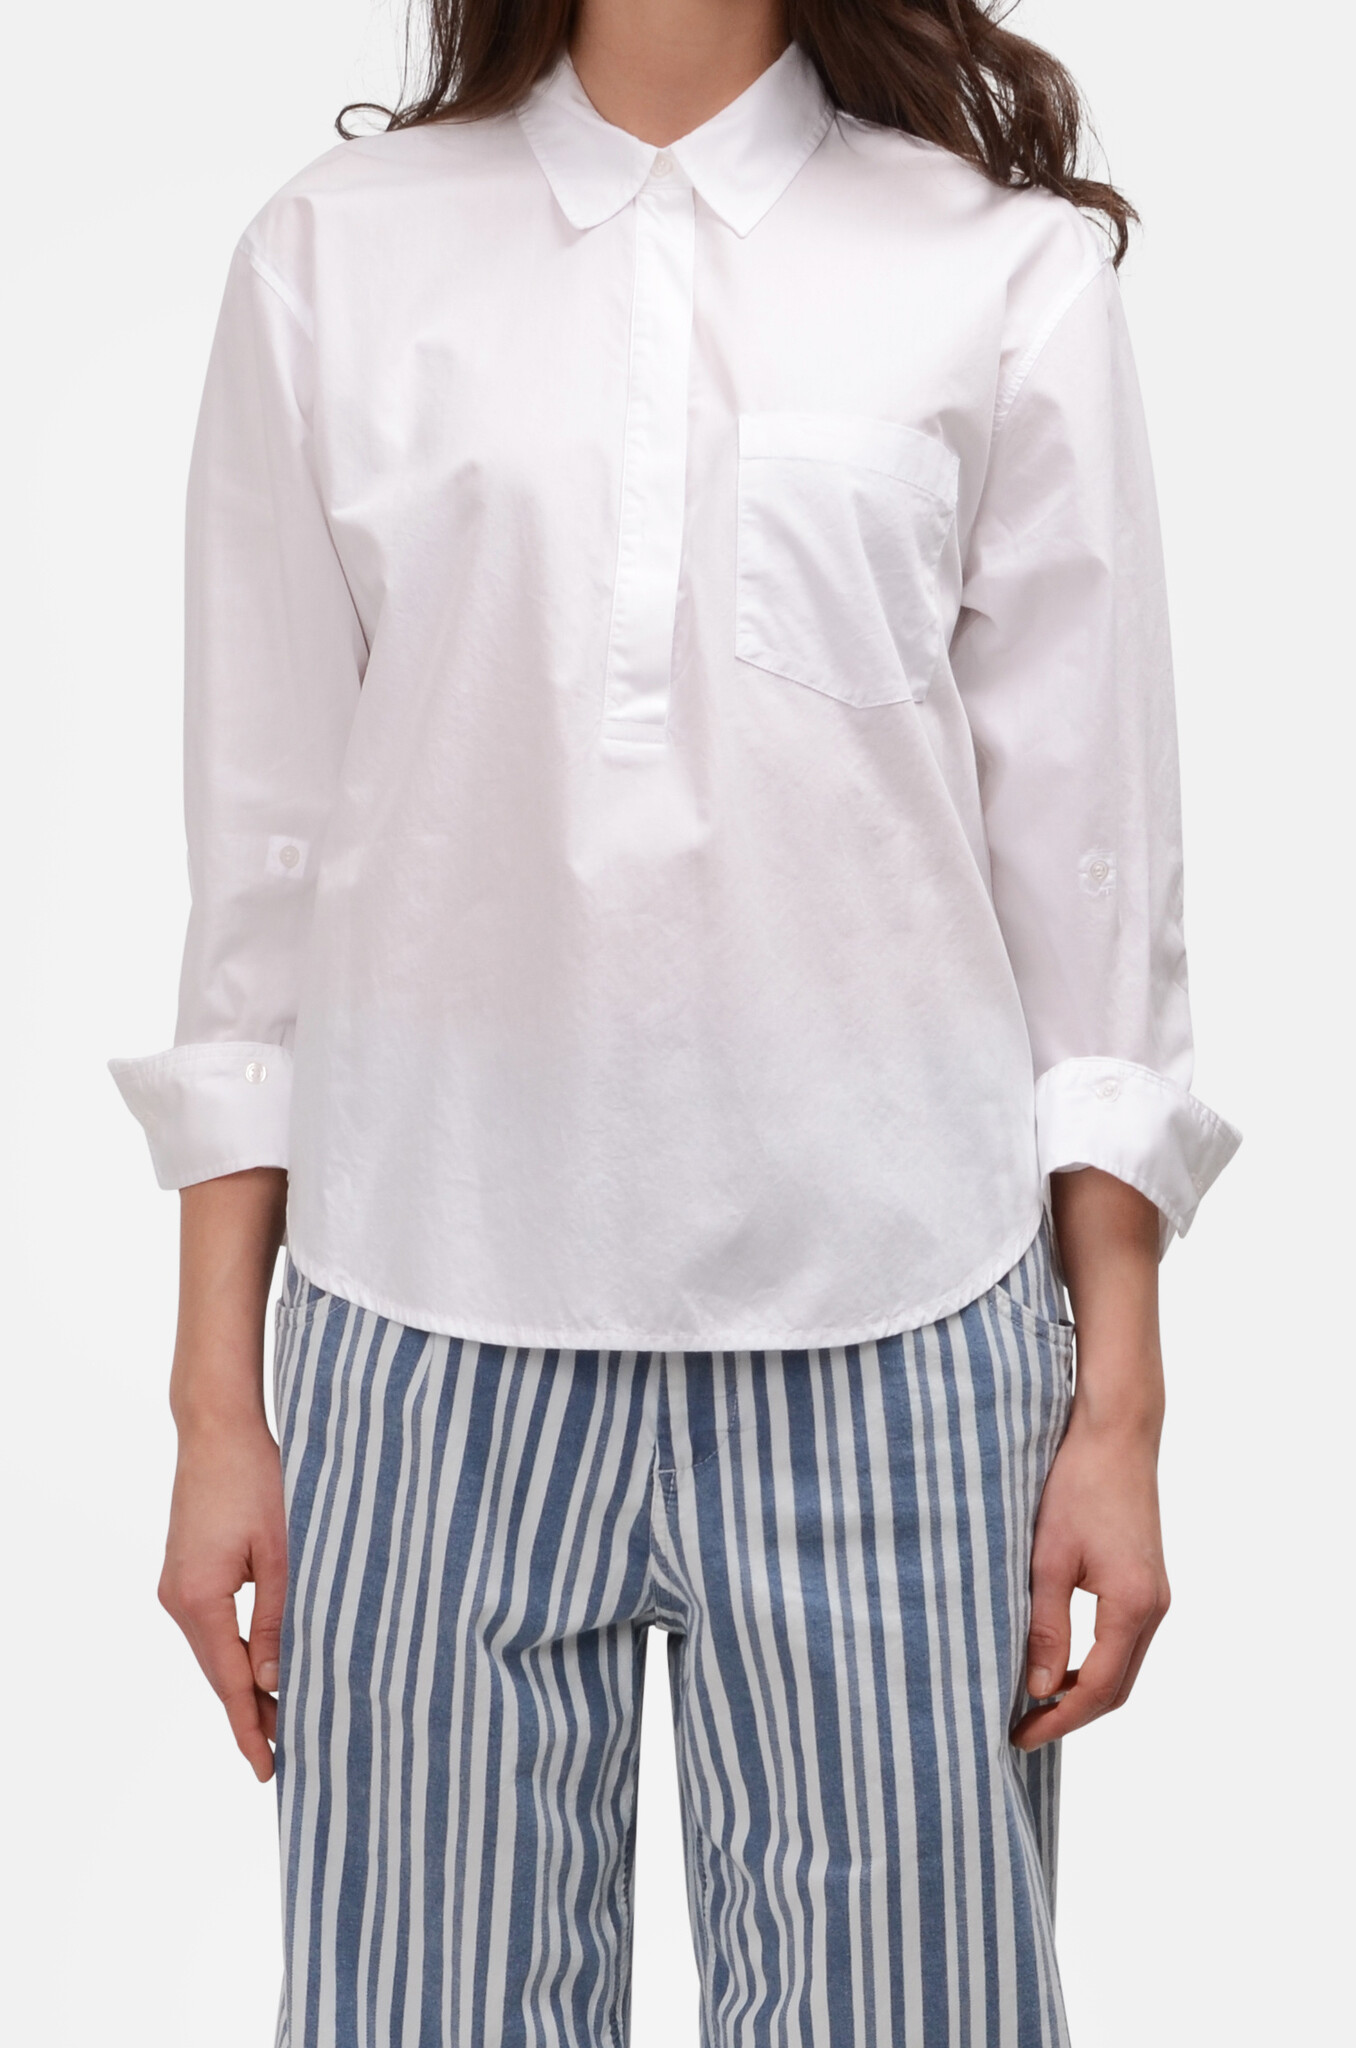 Aave Oversized Cuff Shirt in Optic White-1